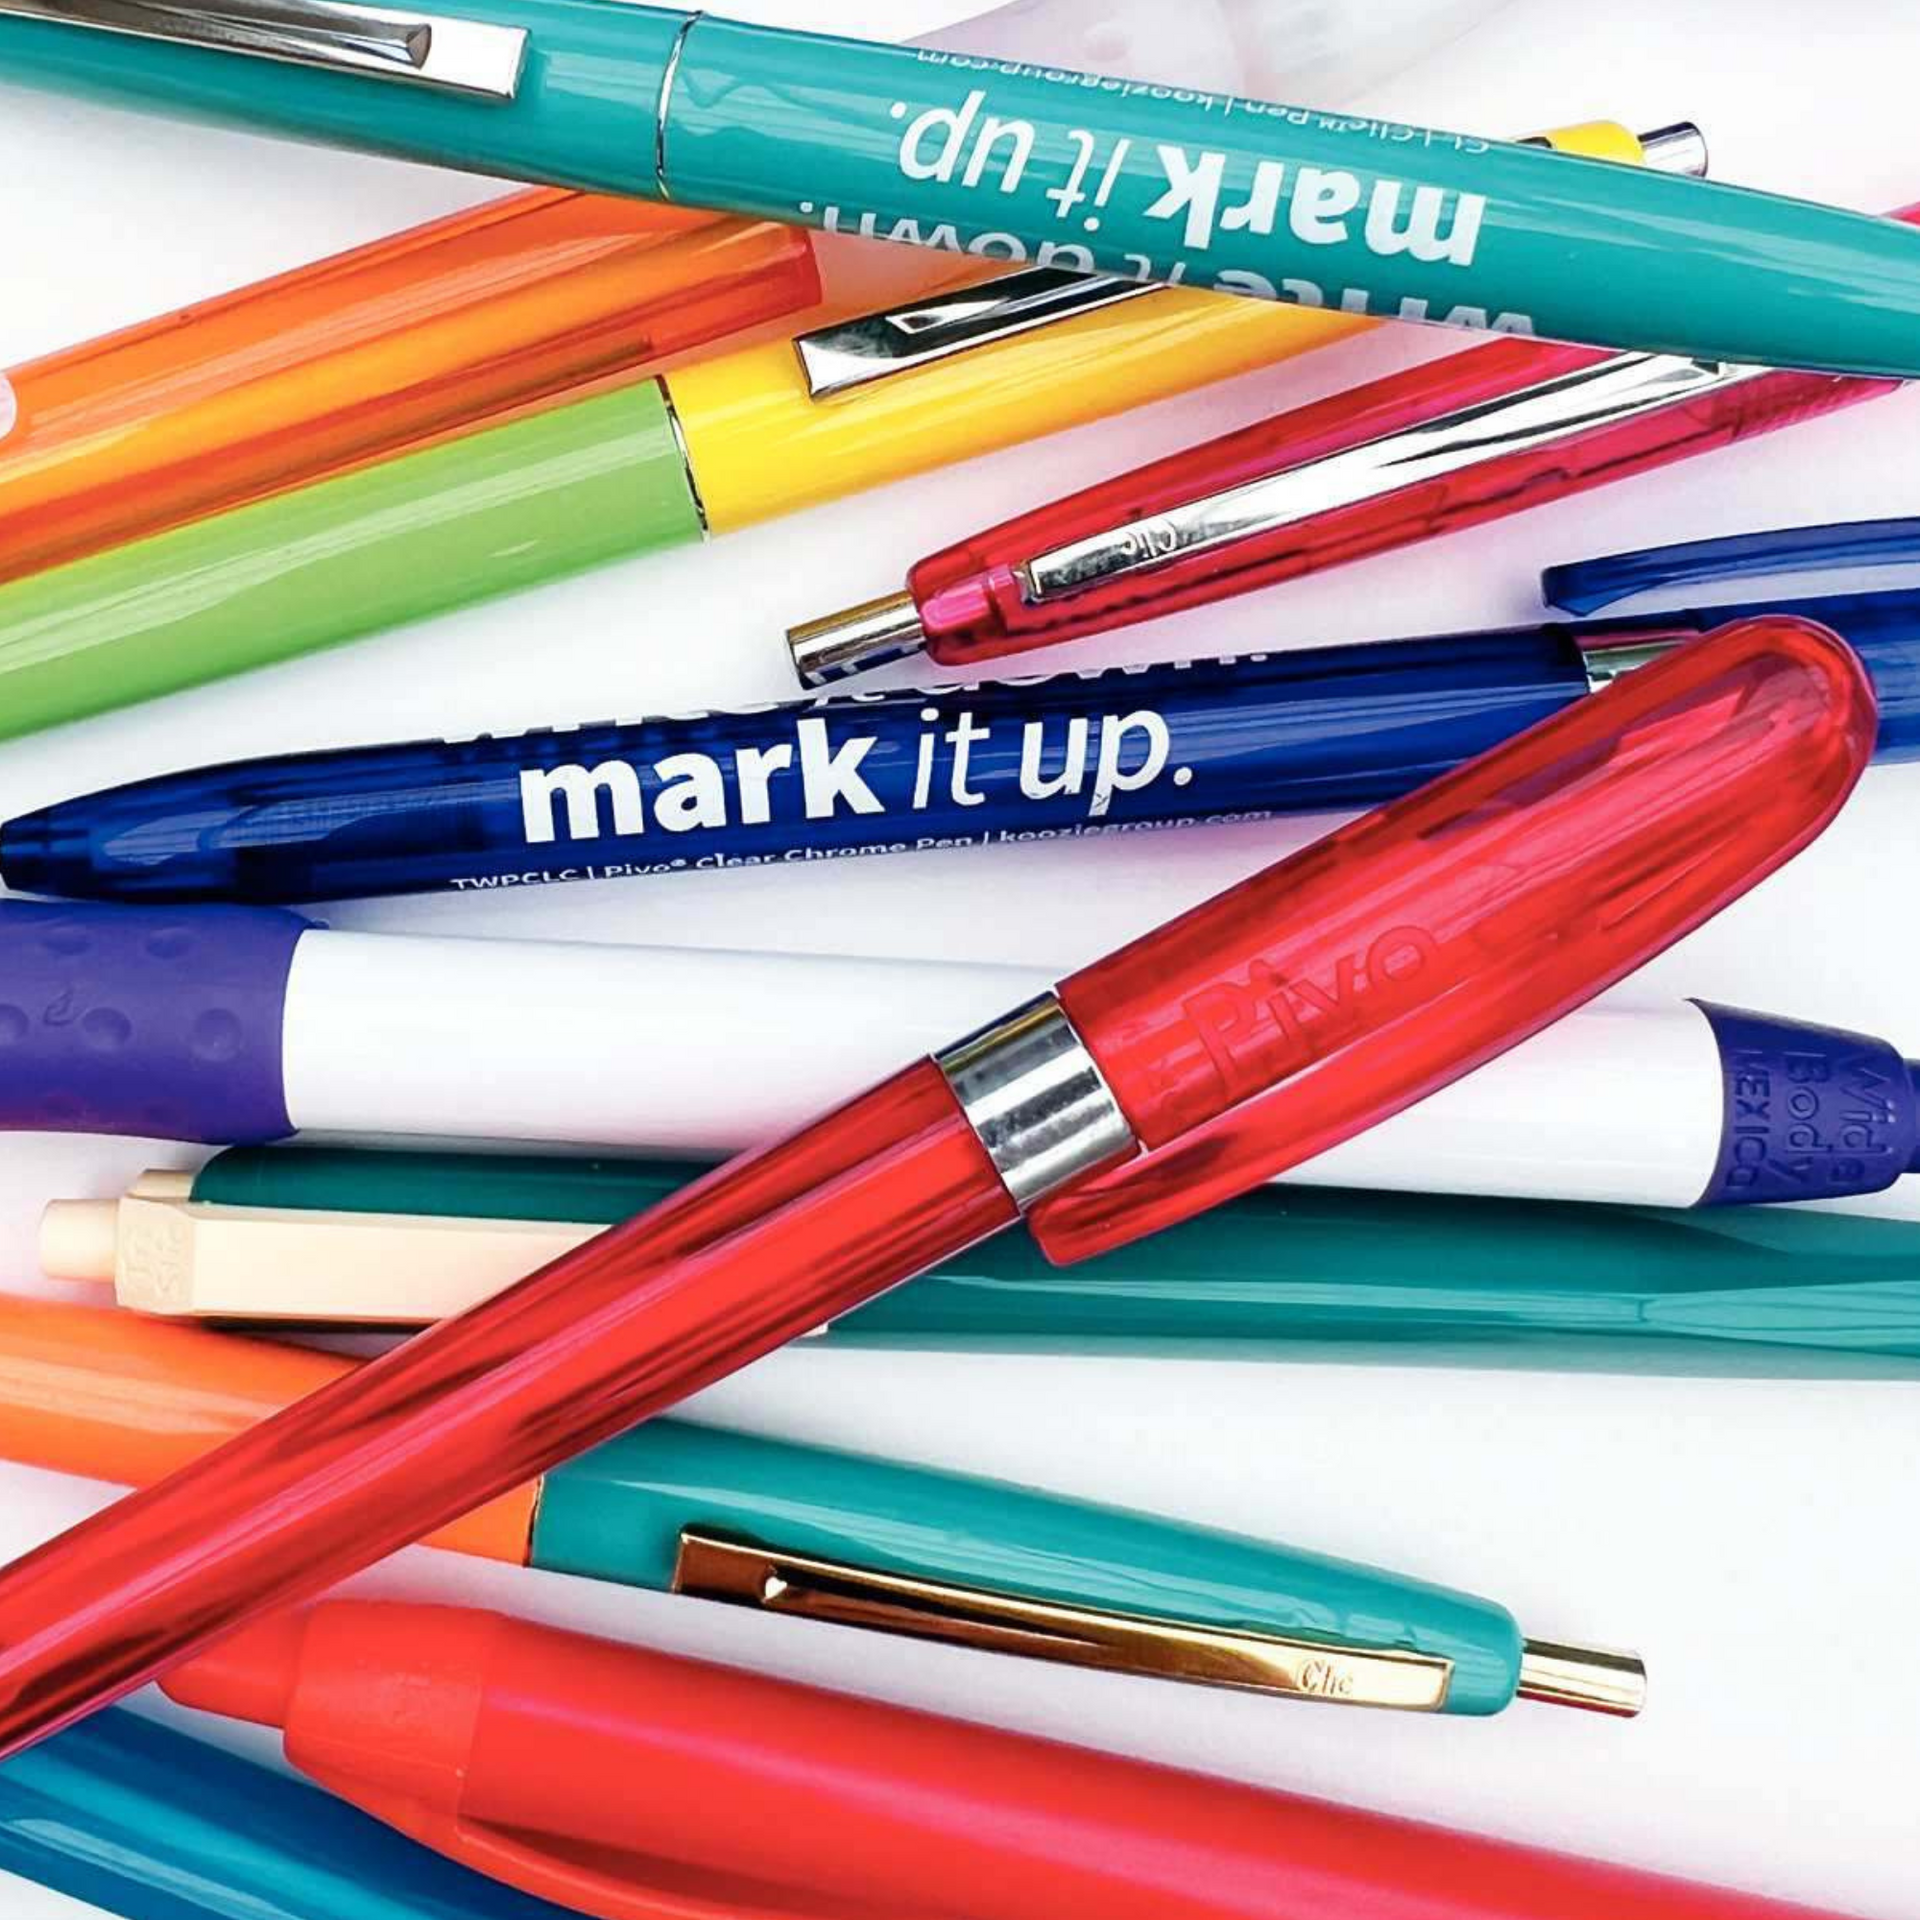 Pens with your company logo engraved, perfect for your marketing efforts.